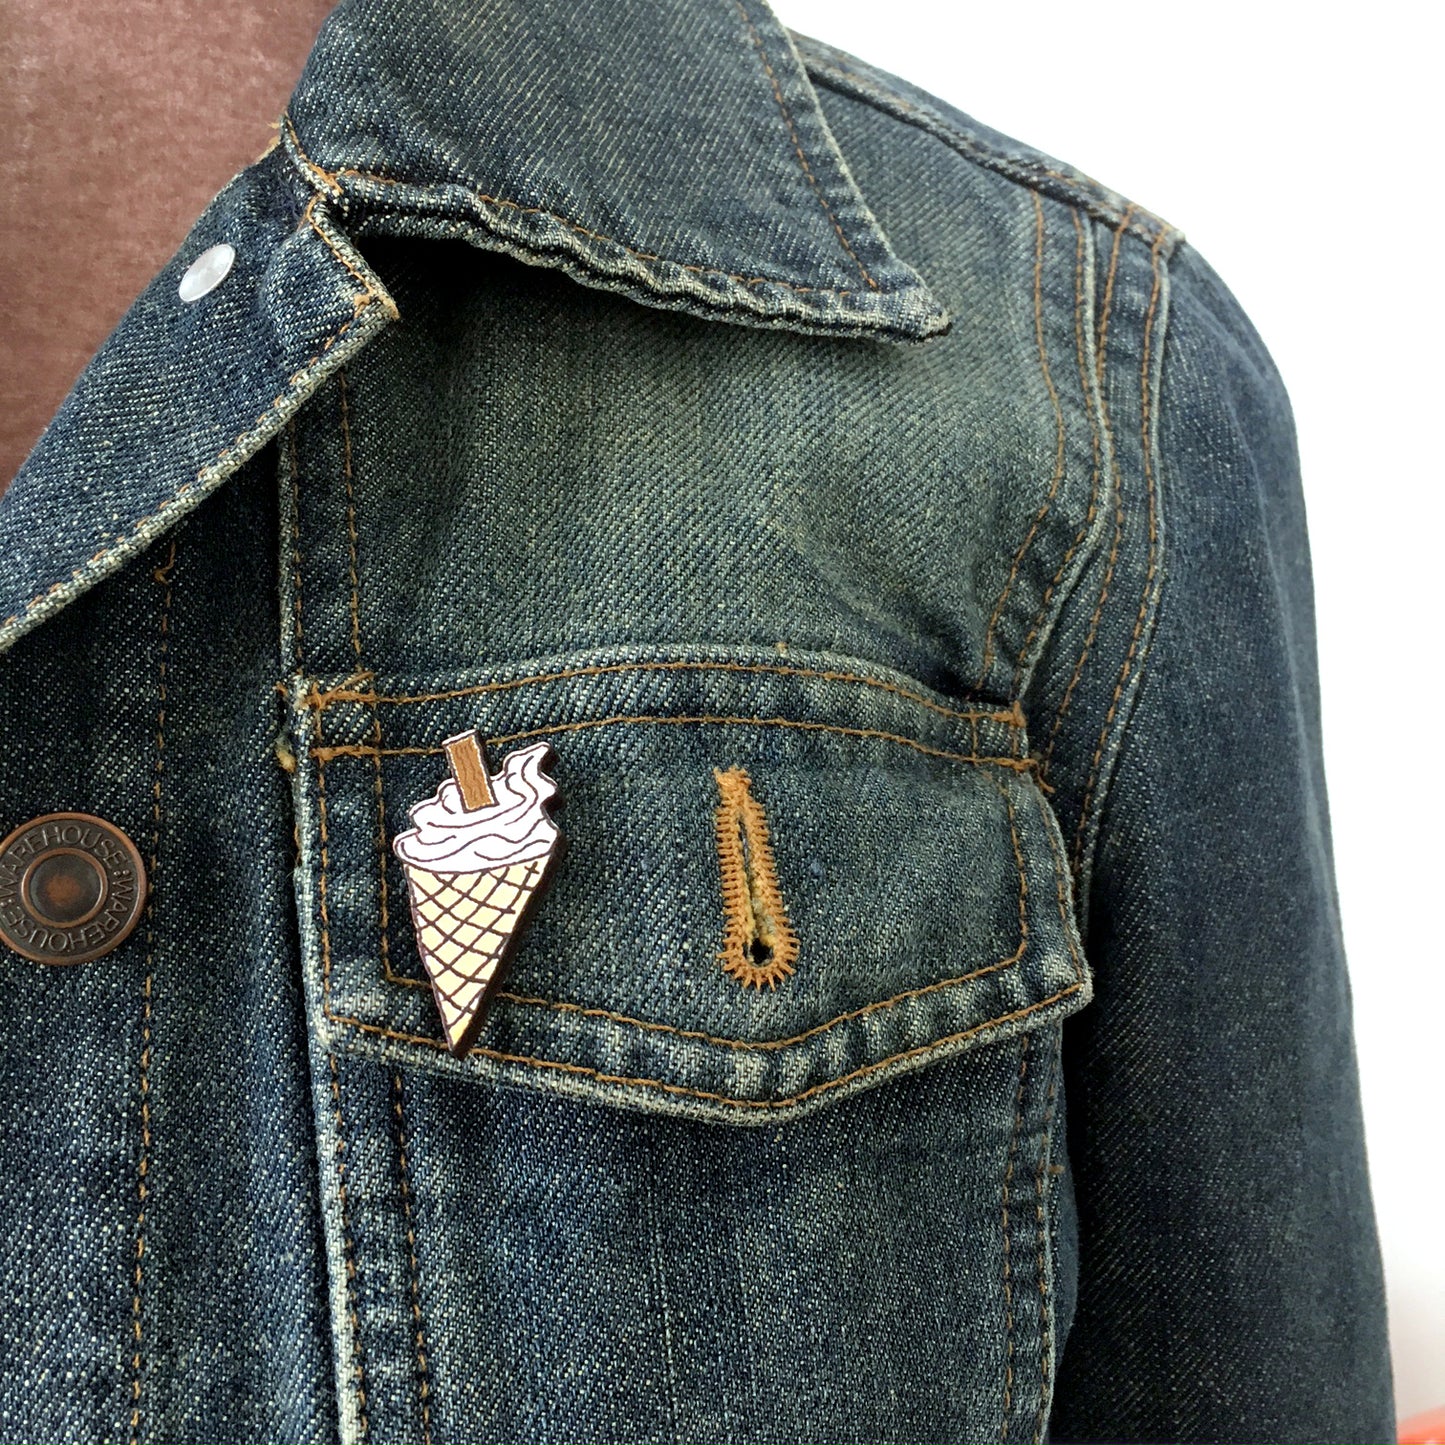 Ice cream cone wooden pin - Great gift for girls